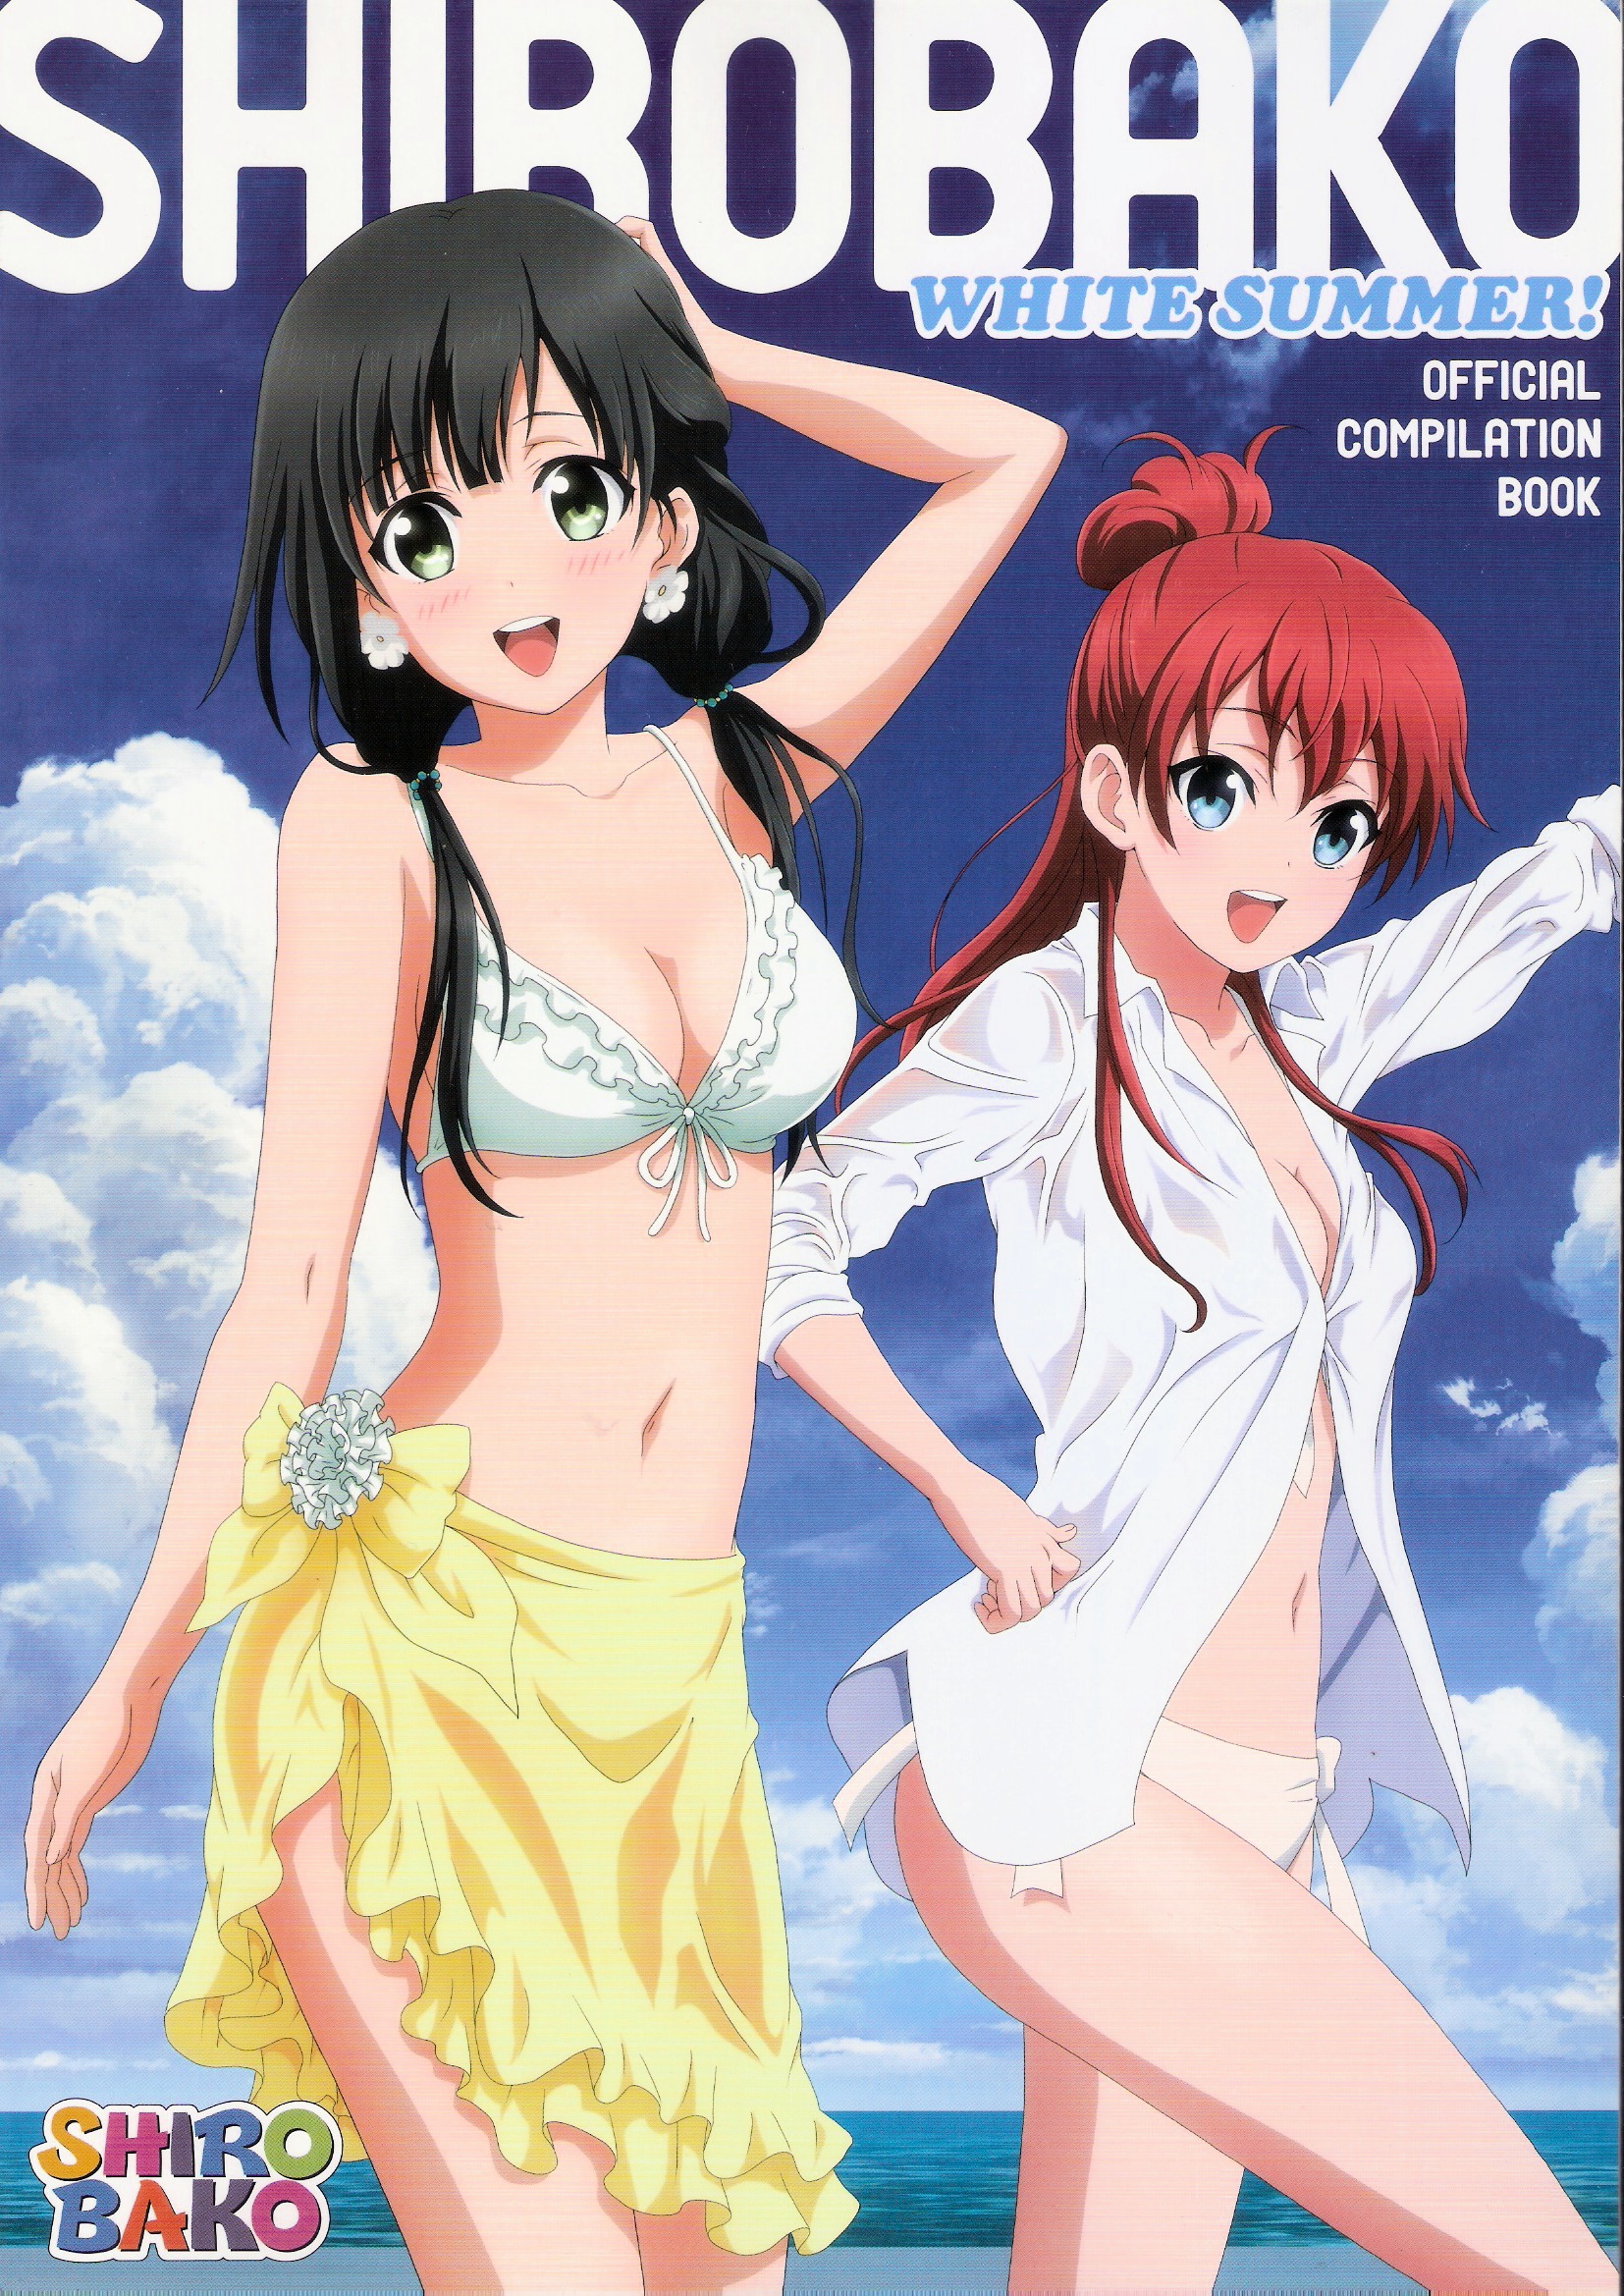 Shirobako White Summer Official Compilation Book - Page 1